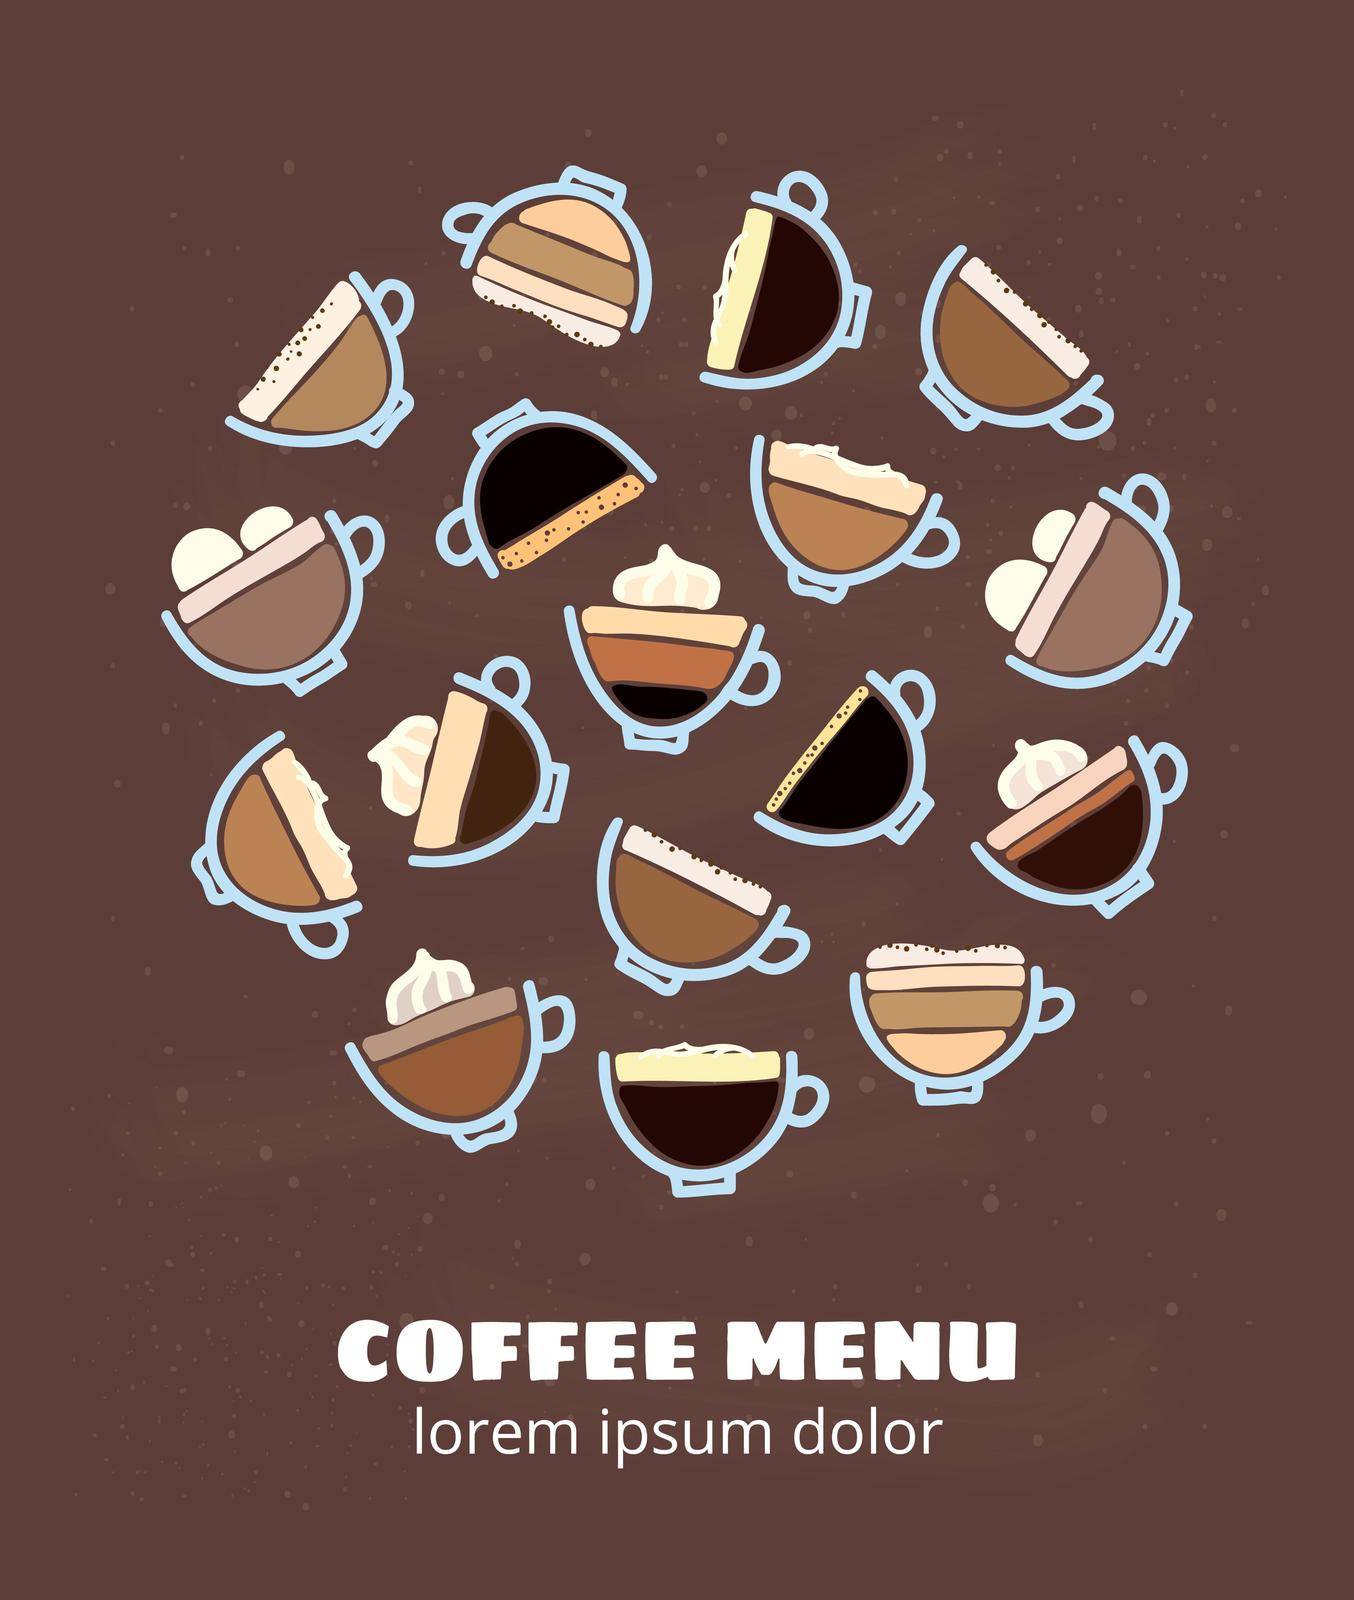 Different doodle coffee drinks in circle shape isolated on brown background.